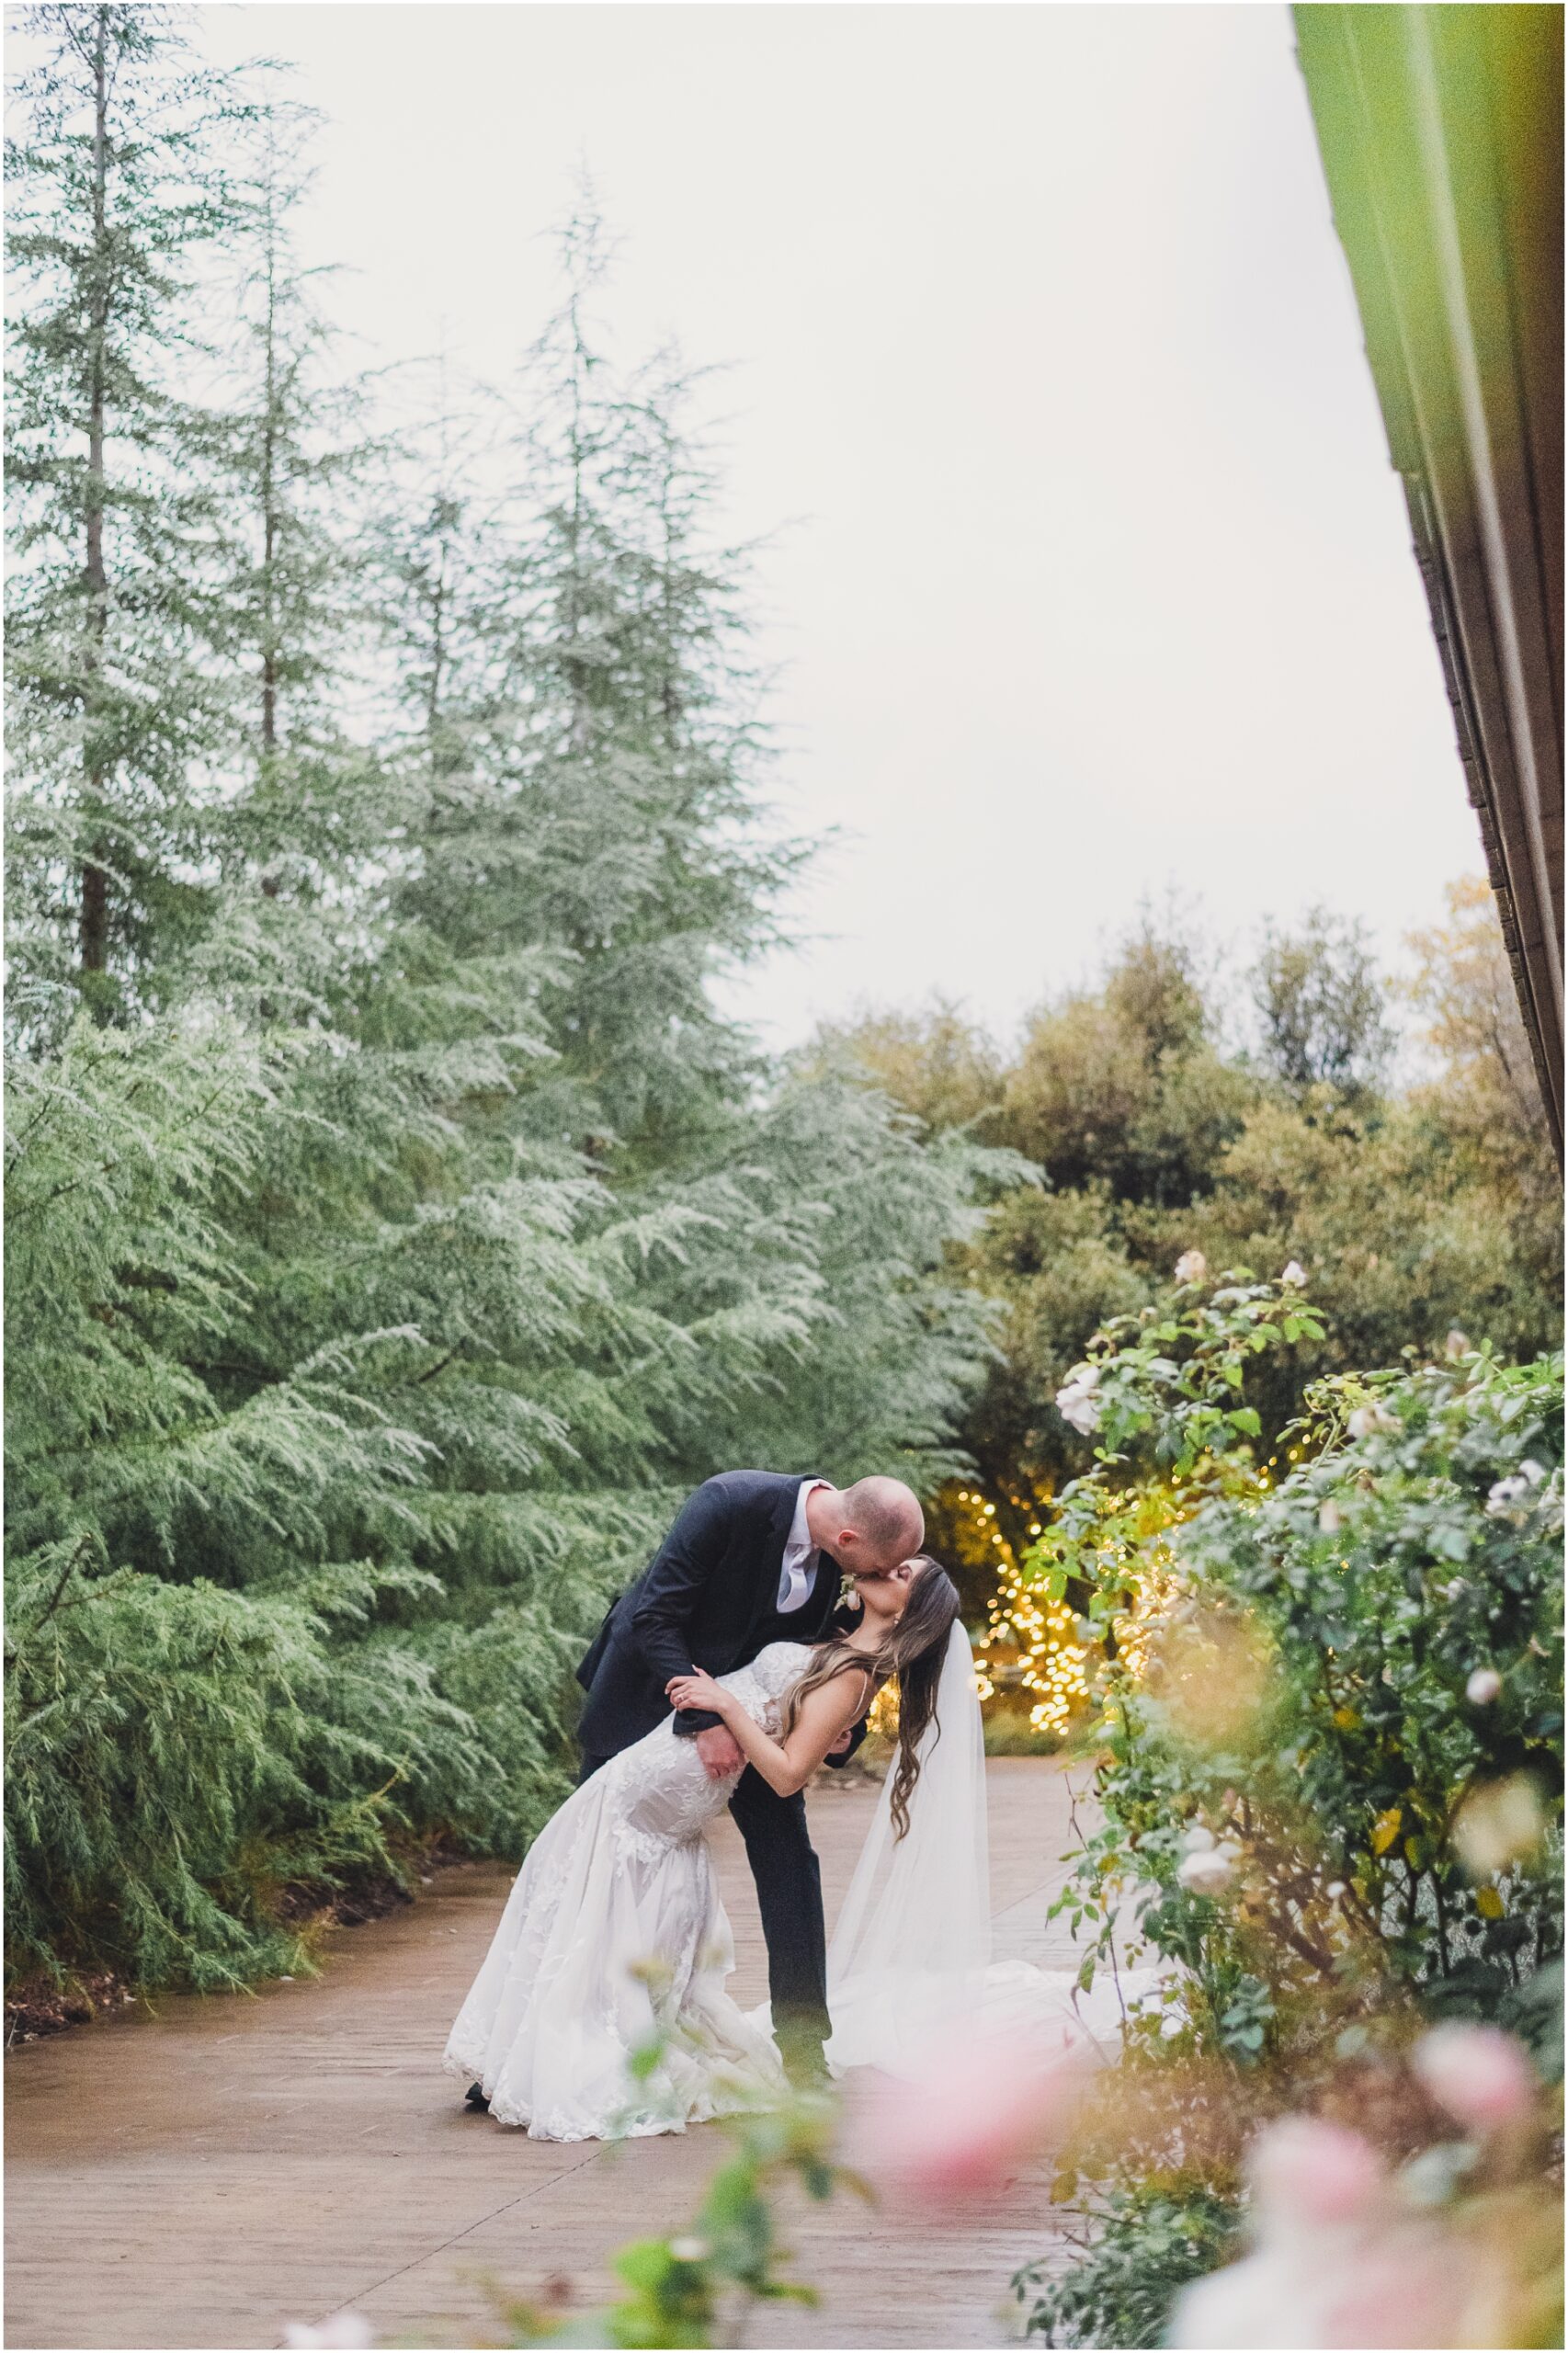 A groom dips his bride during couples portraits with Sun & Sparrow at their Serendipity Gardens wedding. the picture features evergreens and a garden